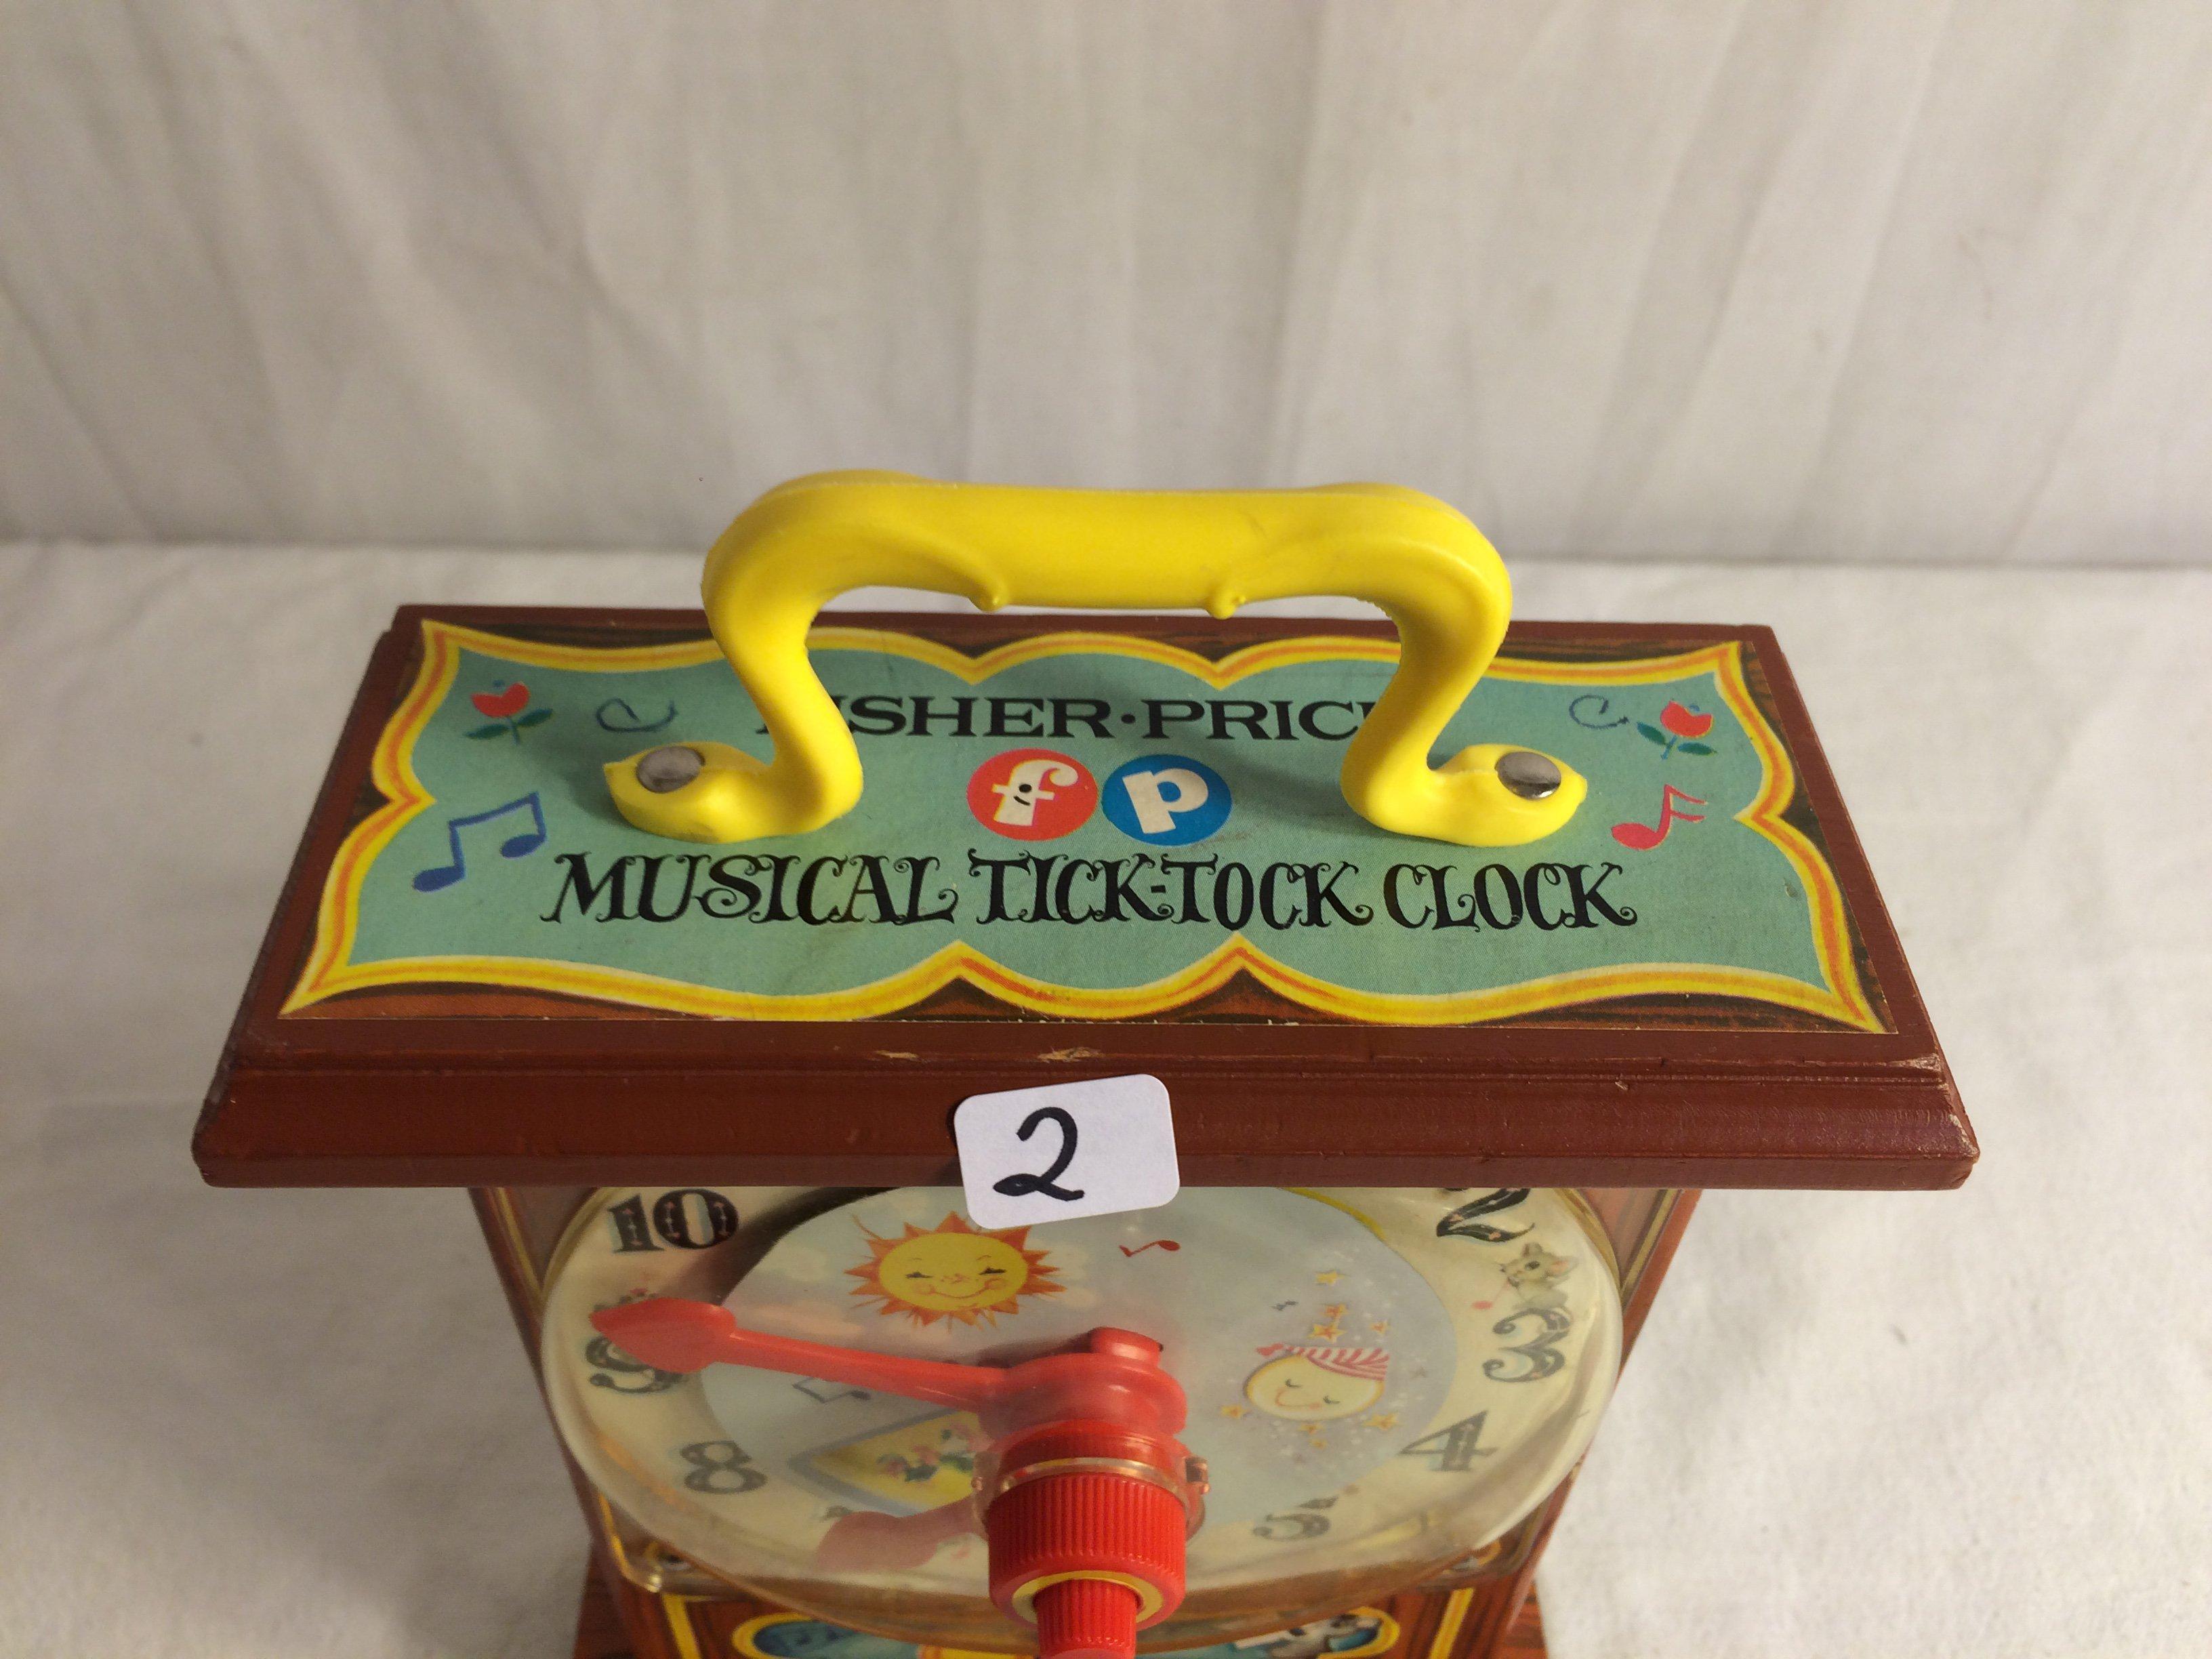 Collector Vintage 1962 Fisher Price Toys Musical Tick-Tock Clock No.997 Size:10.5"T by 6.5